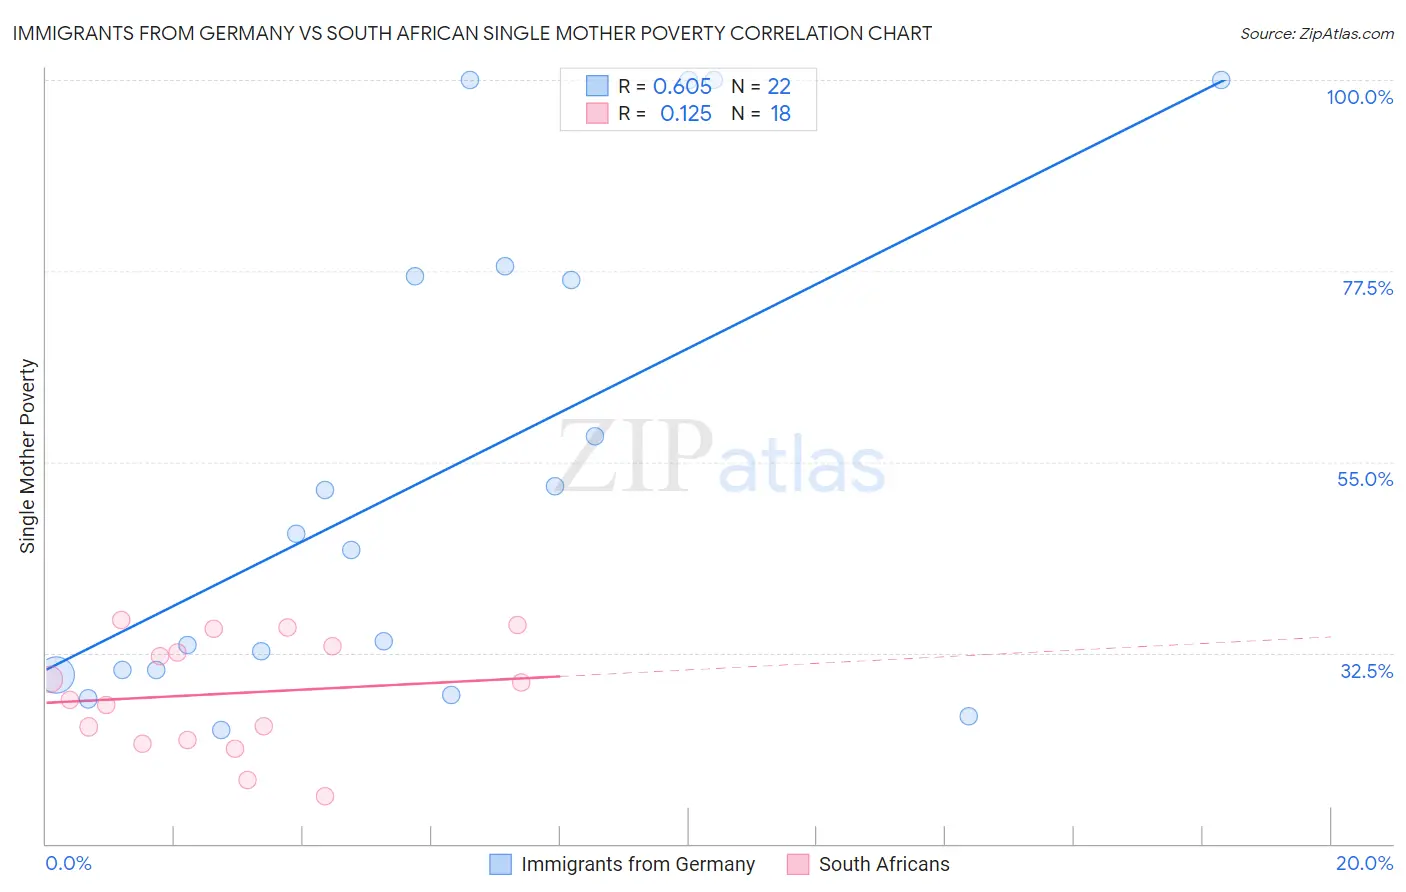 Immigrants from Germany vs South African Single Mother Poverty